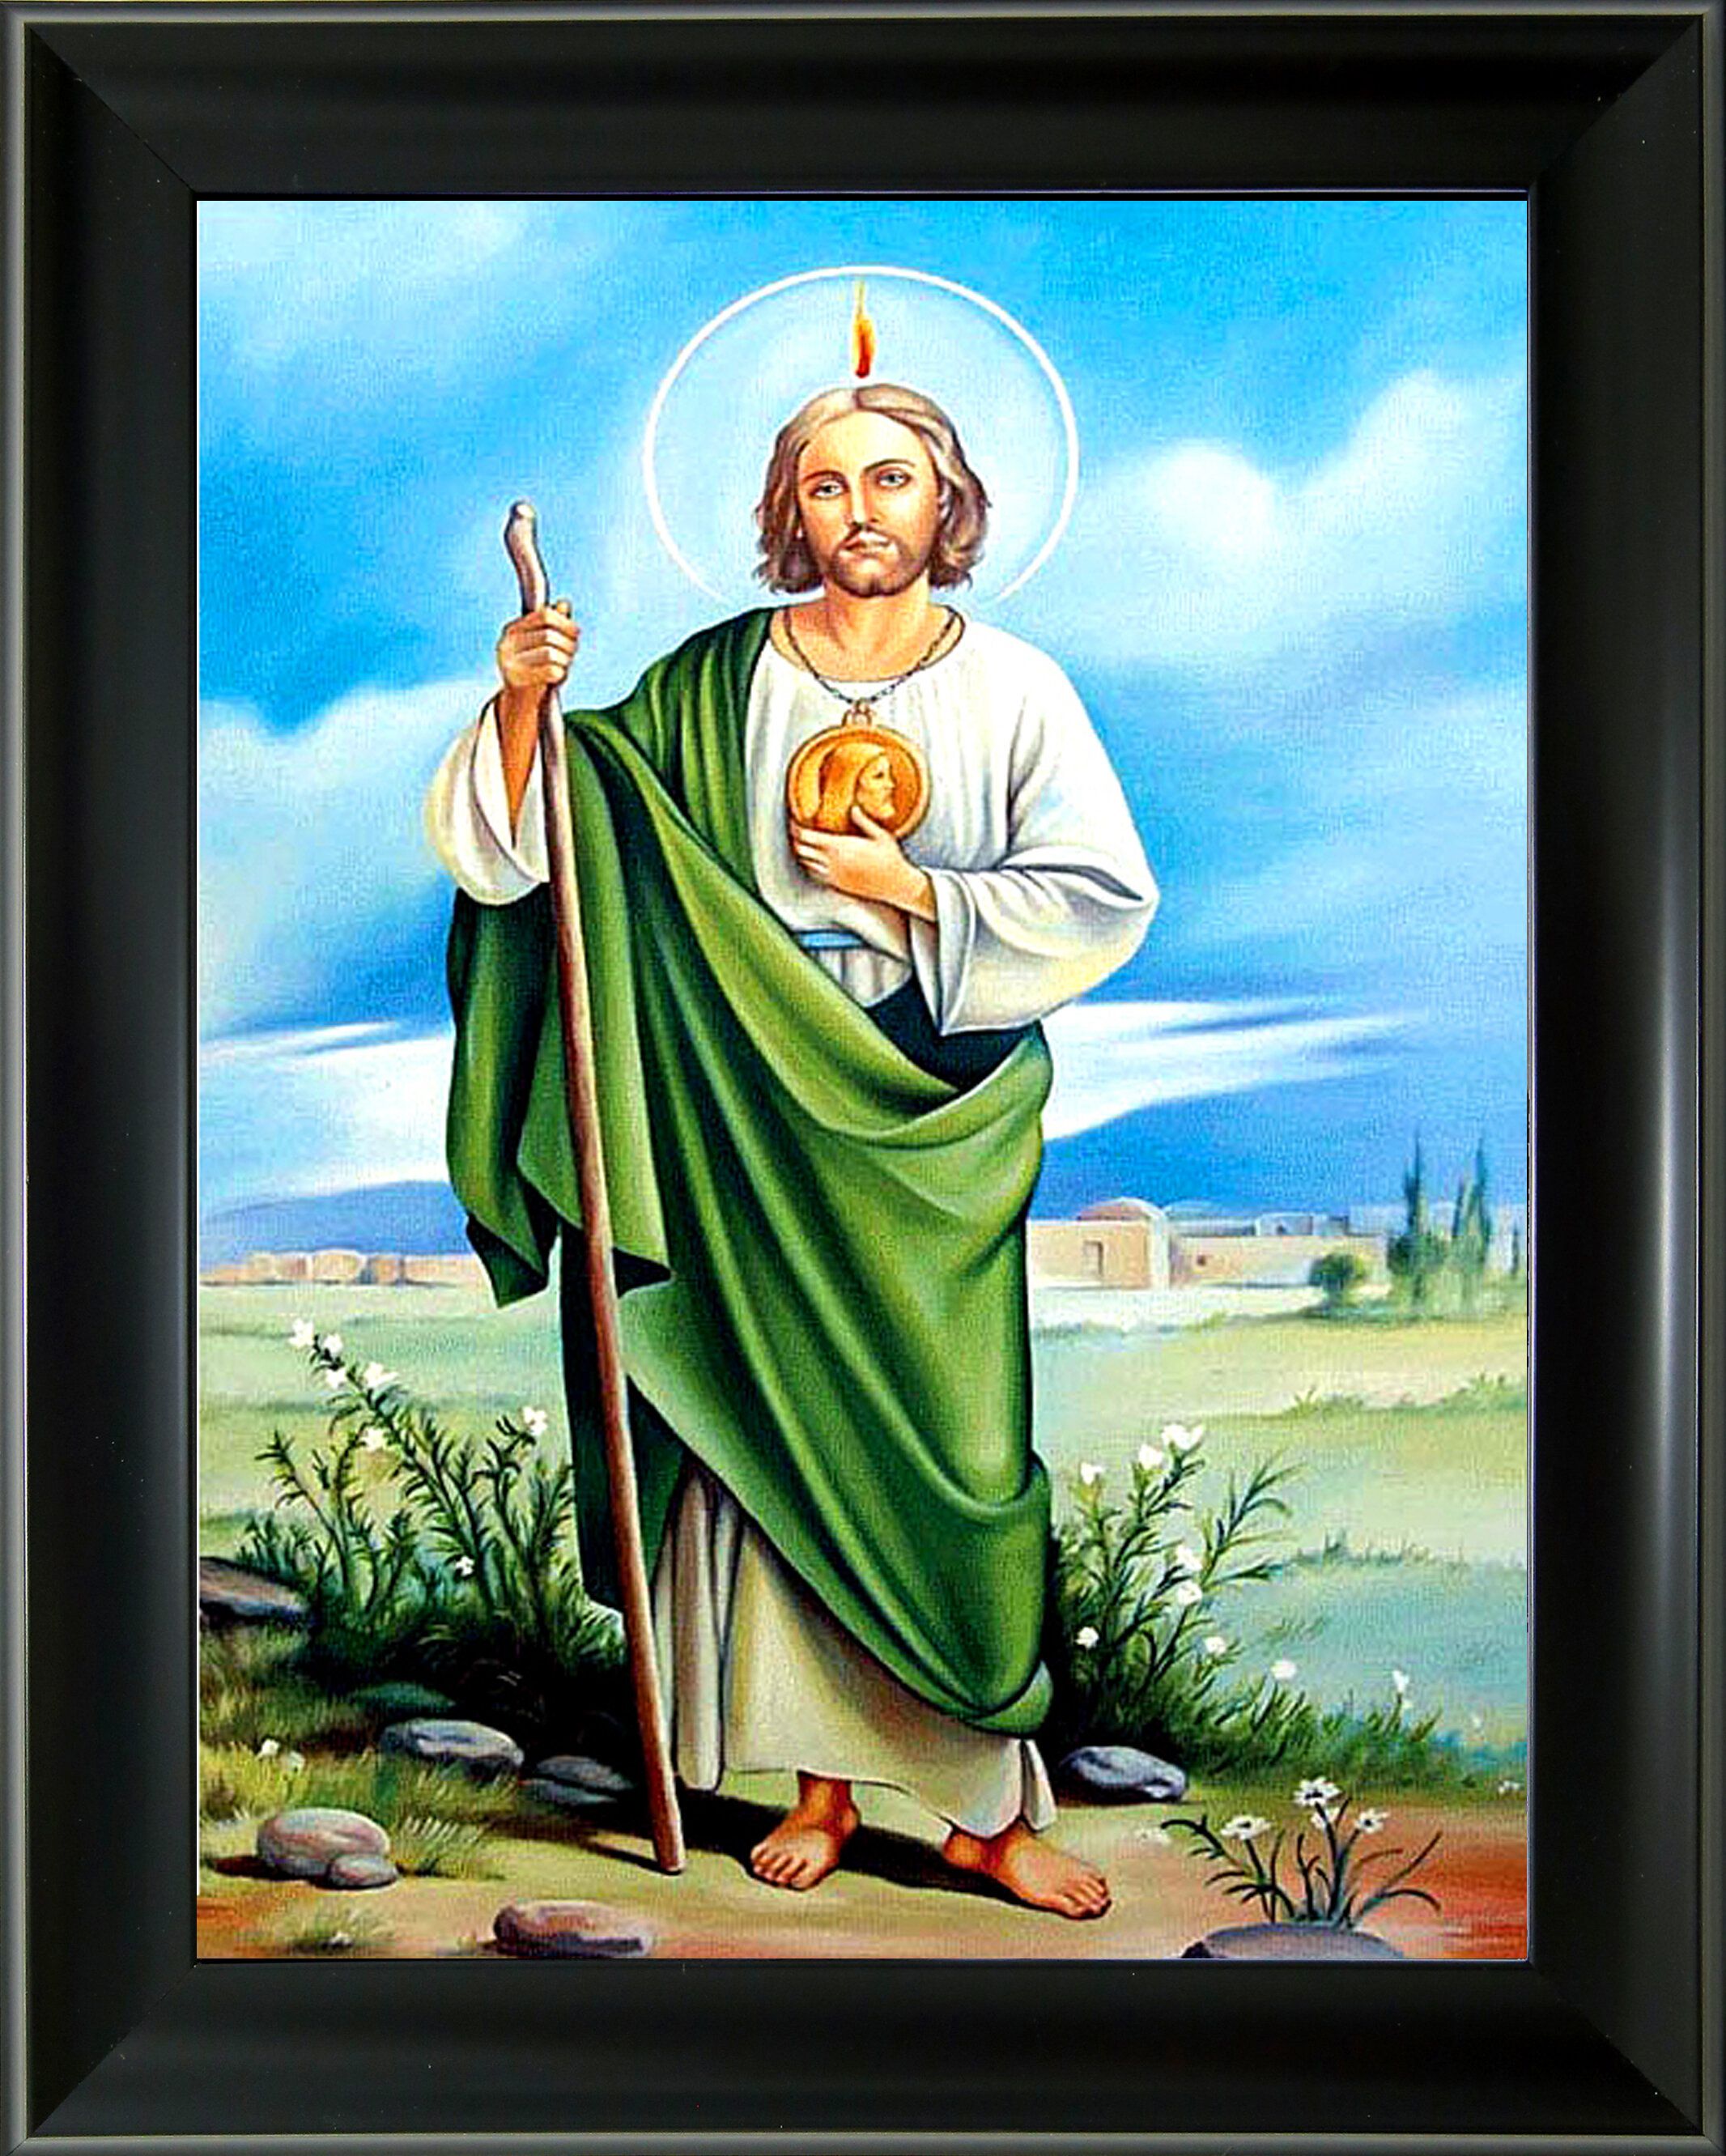 East Urban Home 'Saint Jude The Apostle' Framed Graphic Art Print On Acrylic In Green Blue